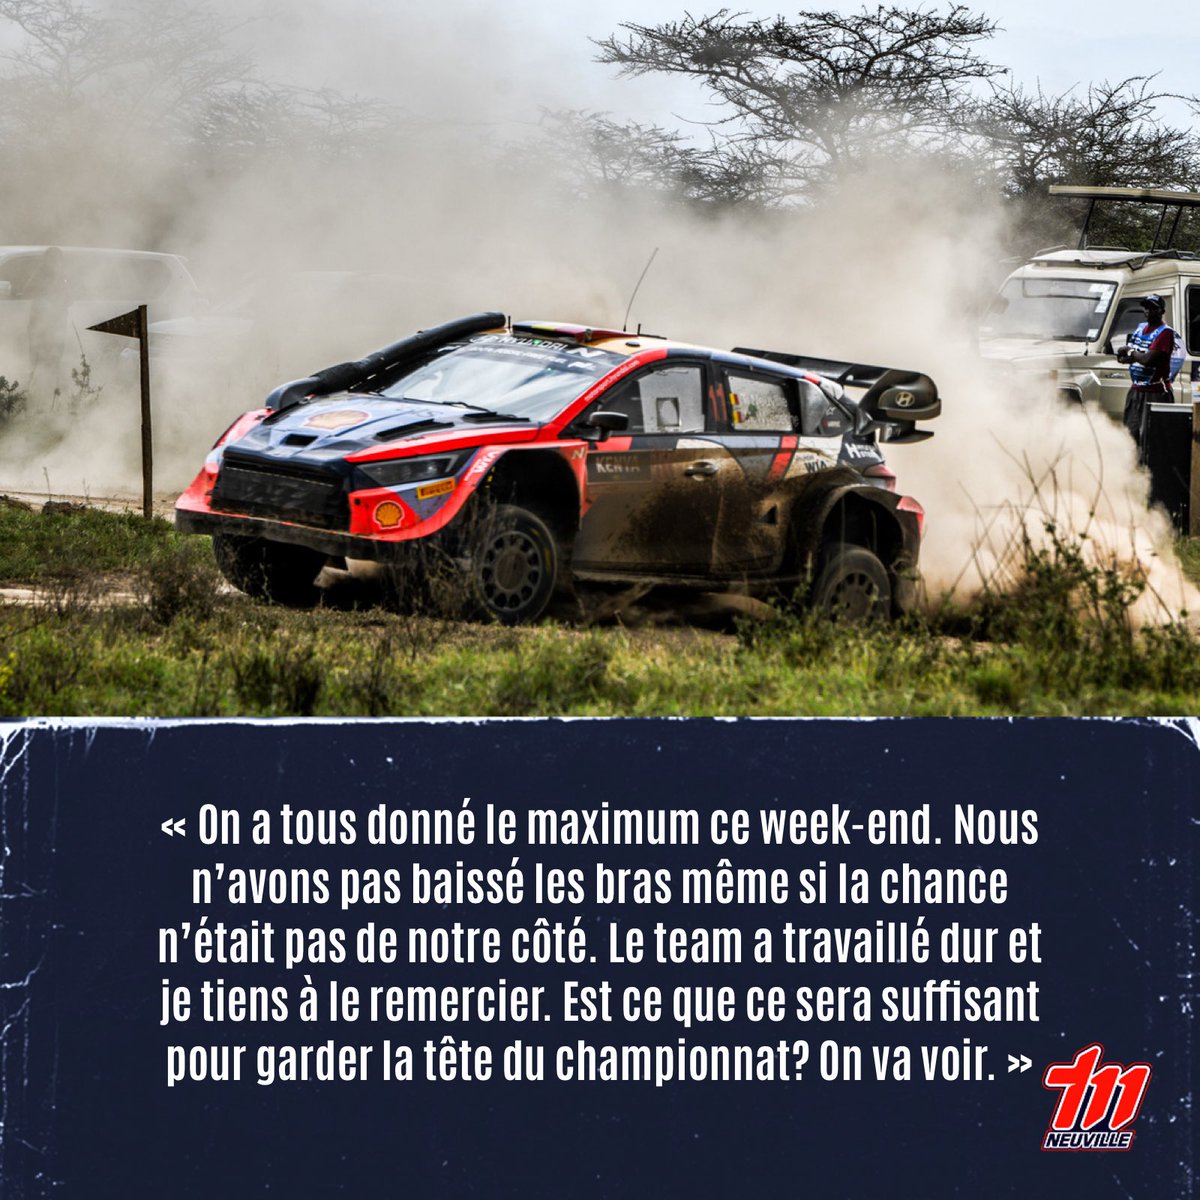 SS19 - Power Stage @SafariRallyWRC 🇰🇪

⏱️ 5:27.1 - Fastest in the Power Stage. Collecting 5 extra points and keeping the lead in the championship. 👊🏼

💬 « I tried, to be honest if you ask me where I get this motivation from? I don't know, but it's in there. Once more, the luck…